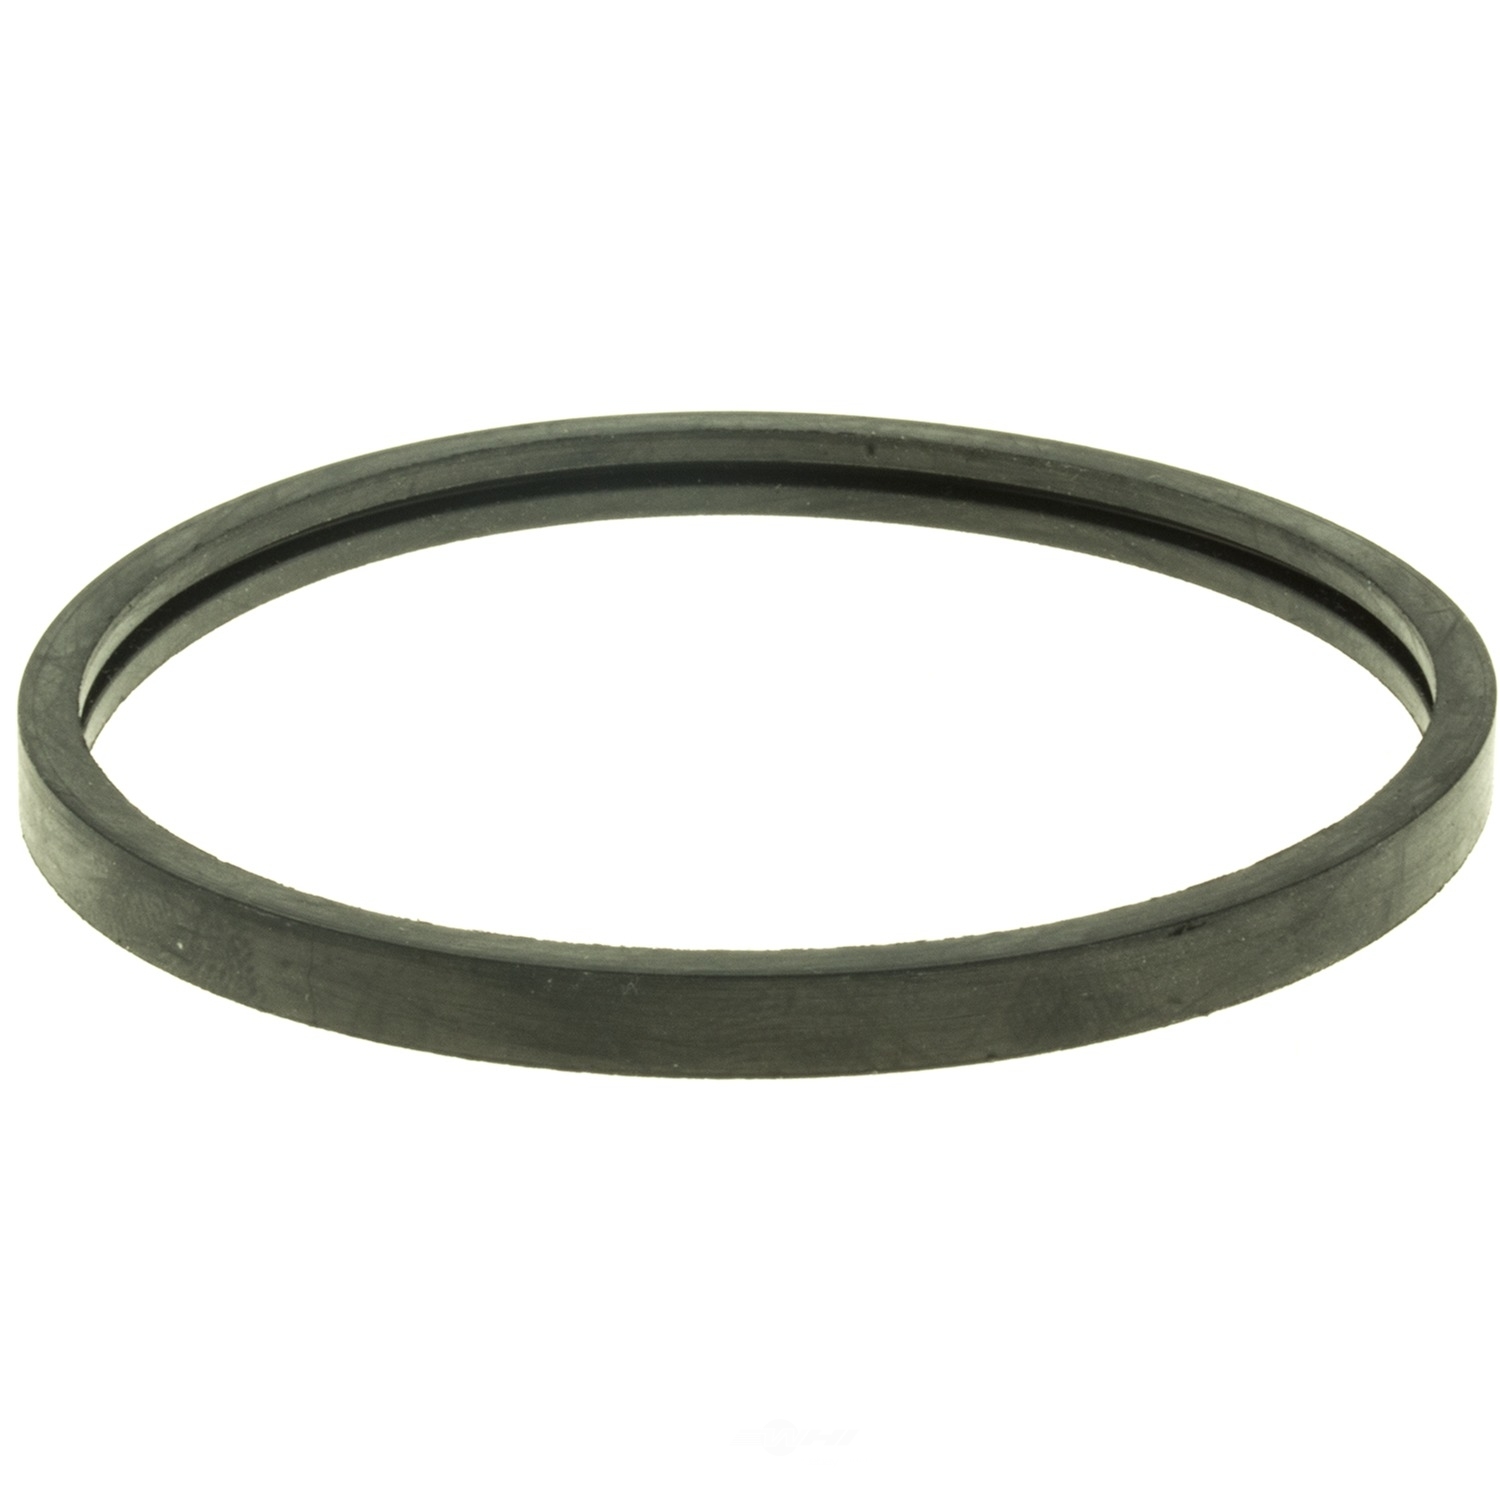 STANT - Thermostat Seal - STN 27266